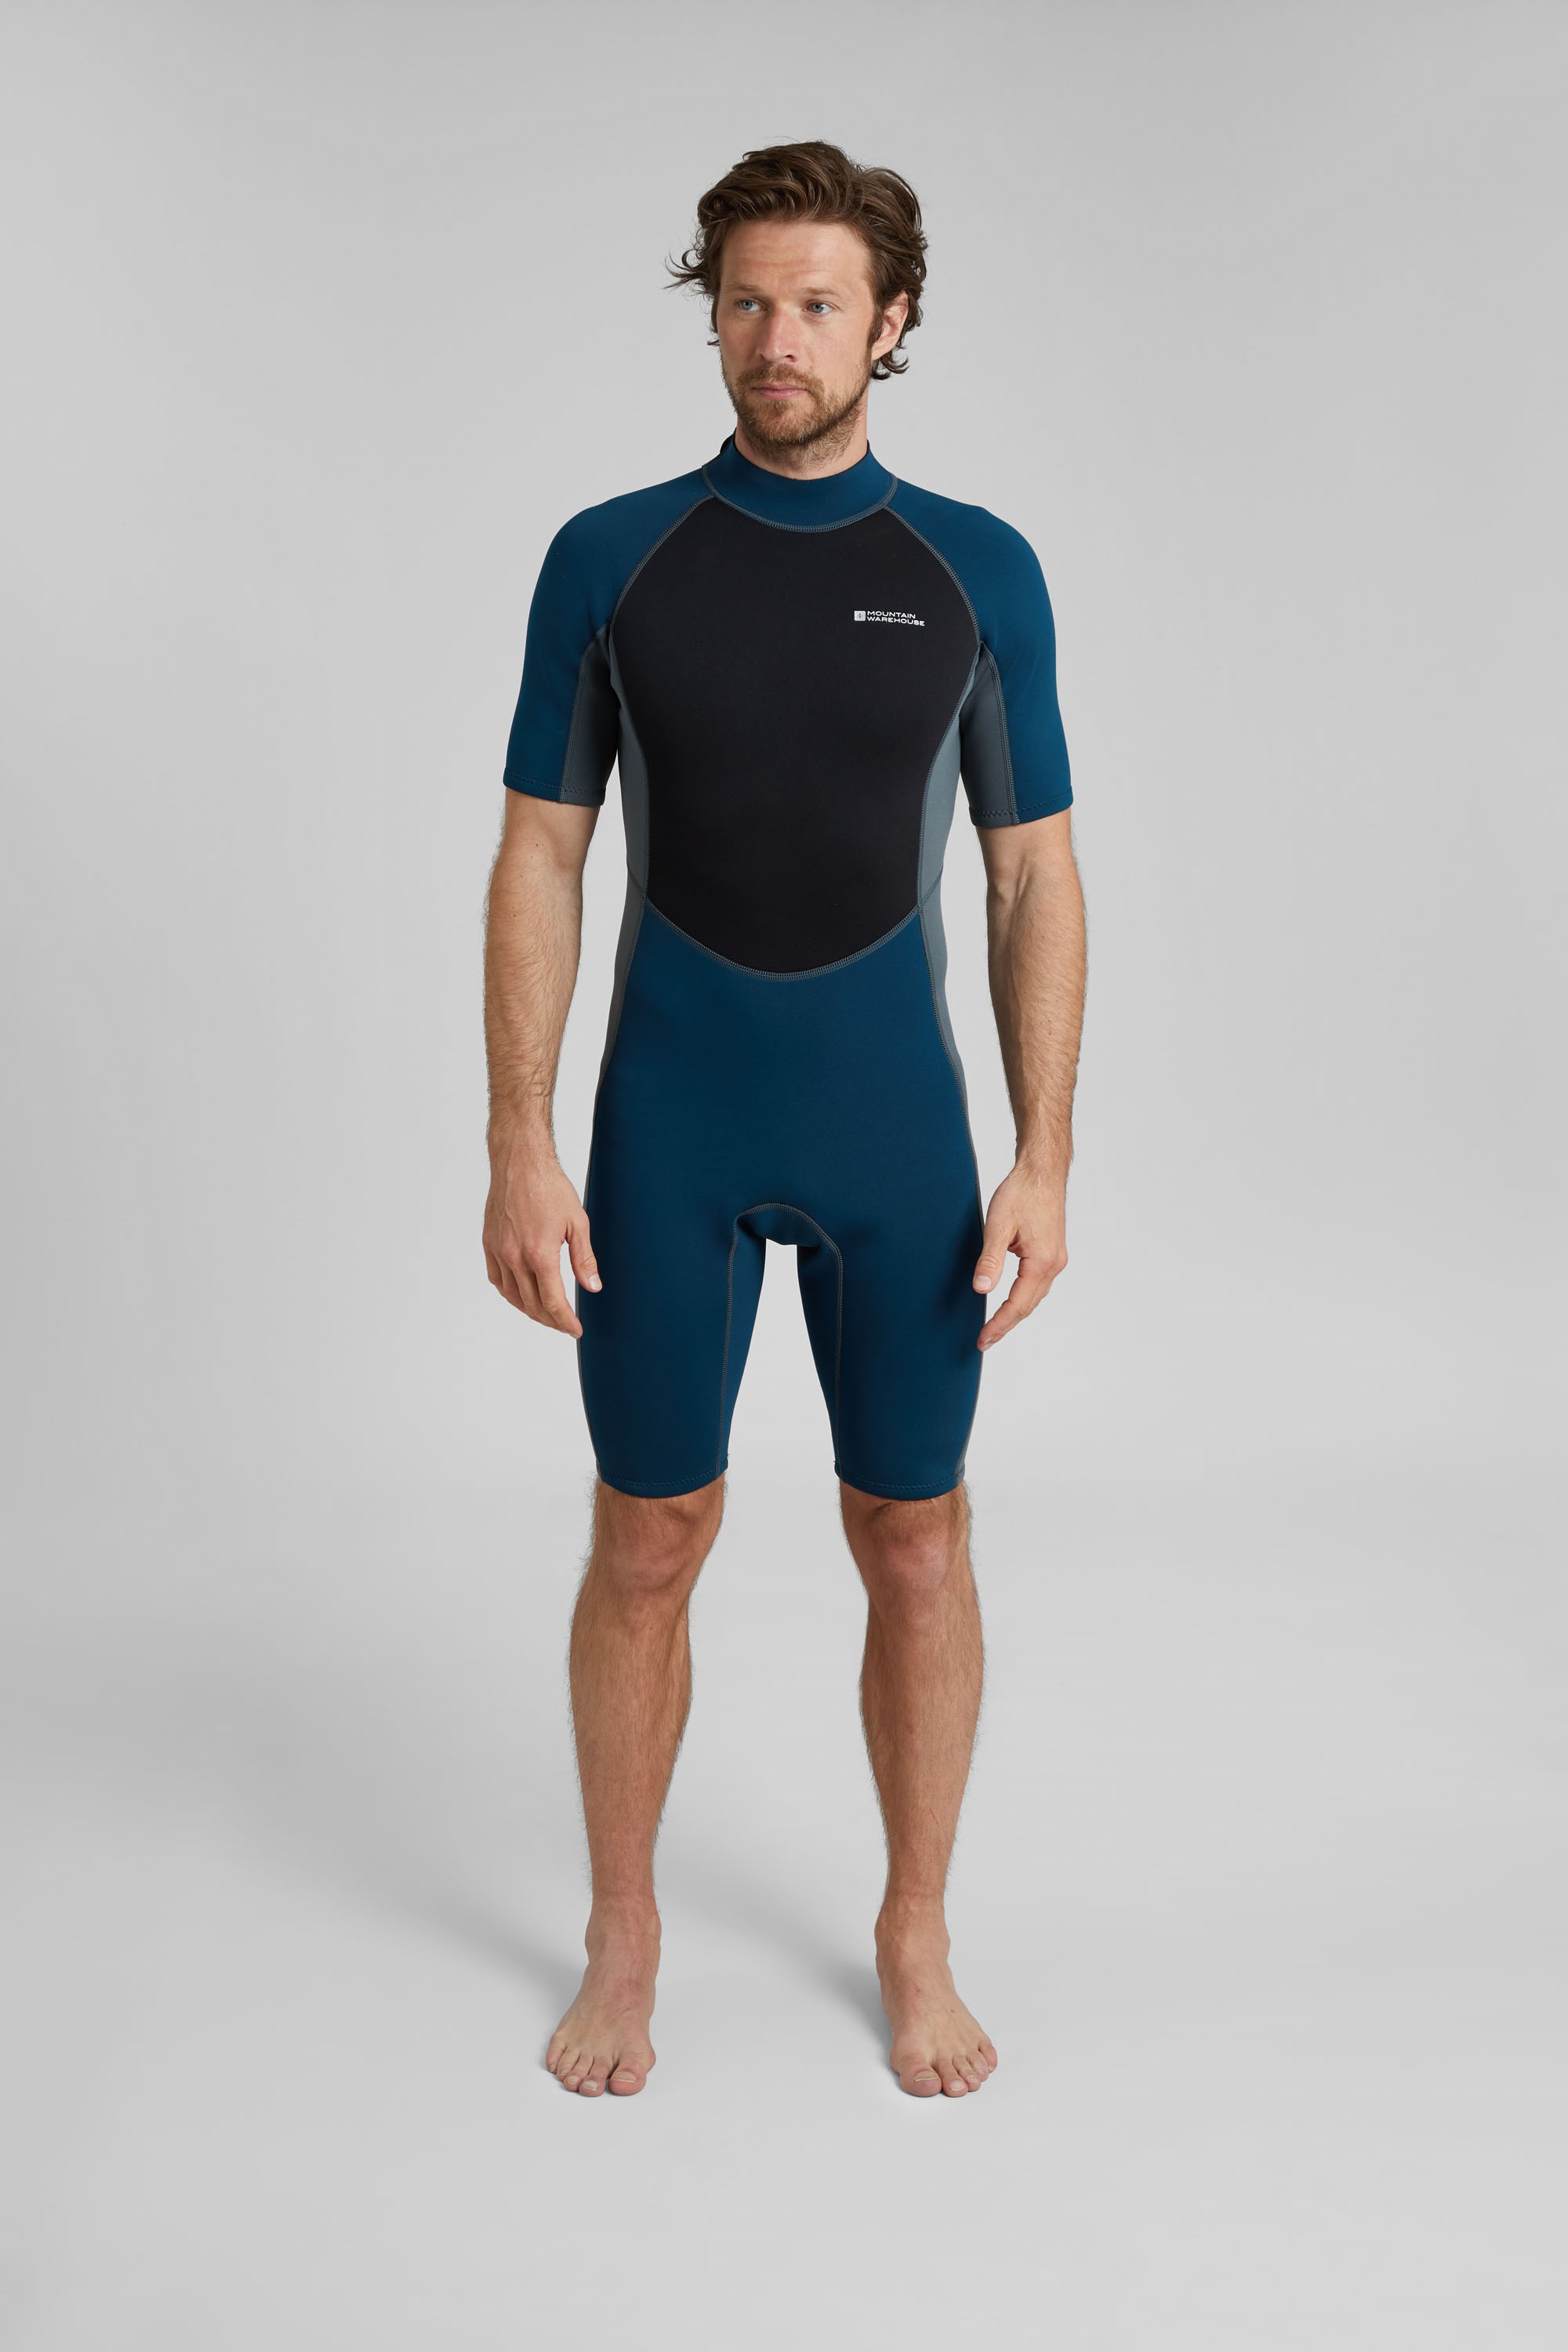 Shorty Mens Wetsuit - Charcoal